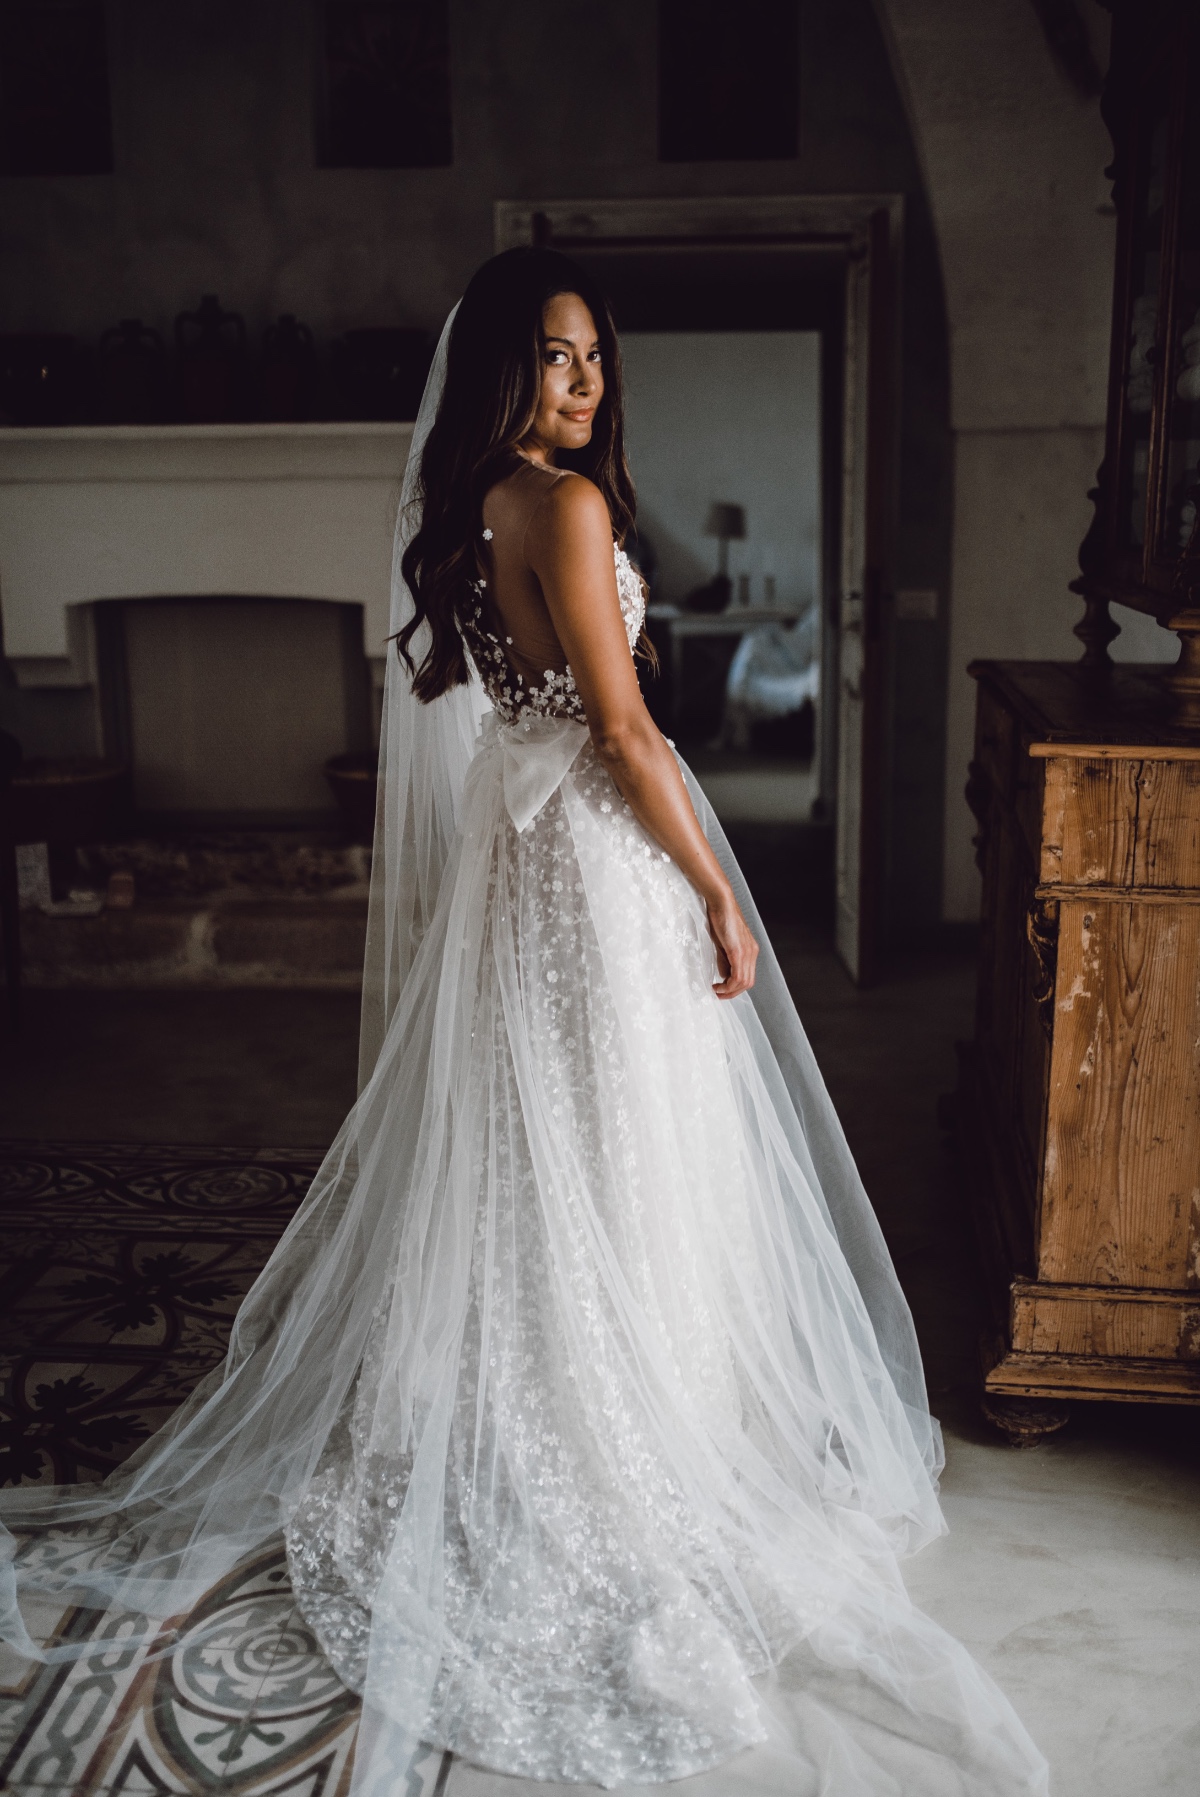 Bride in Muse by Berta dress